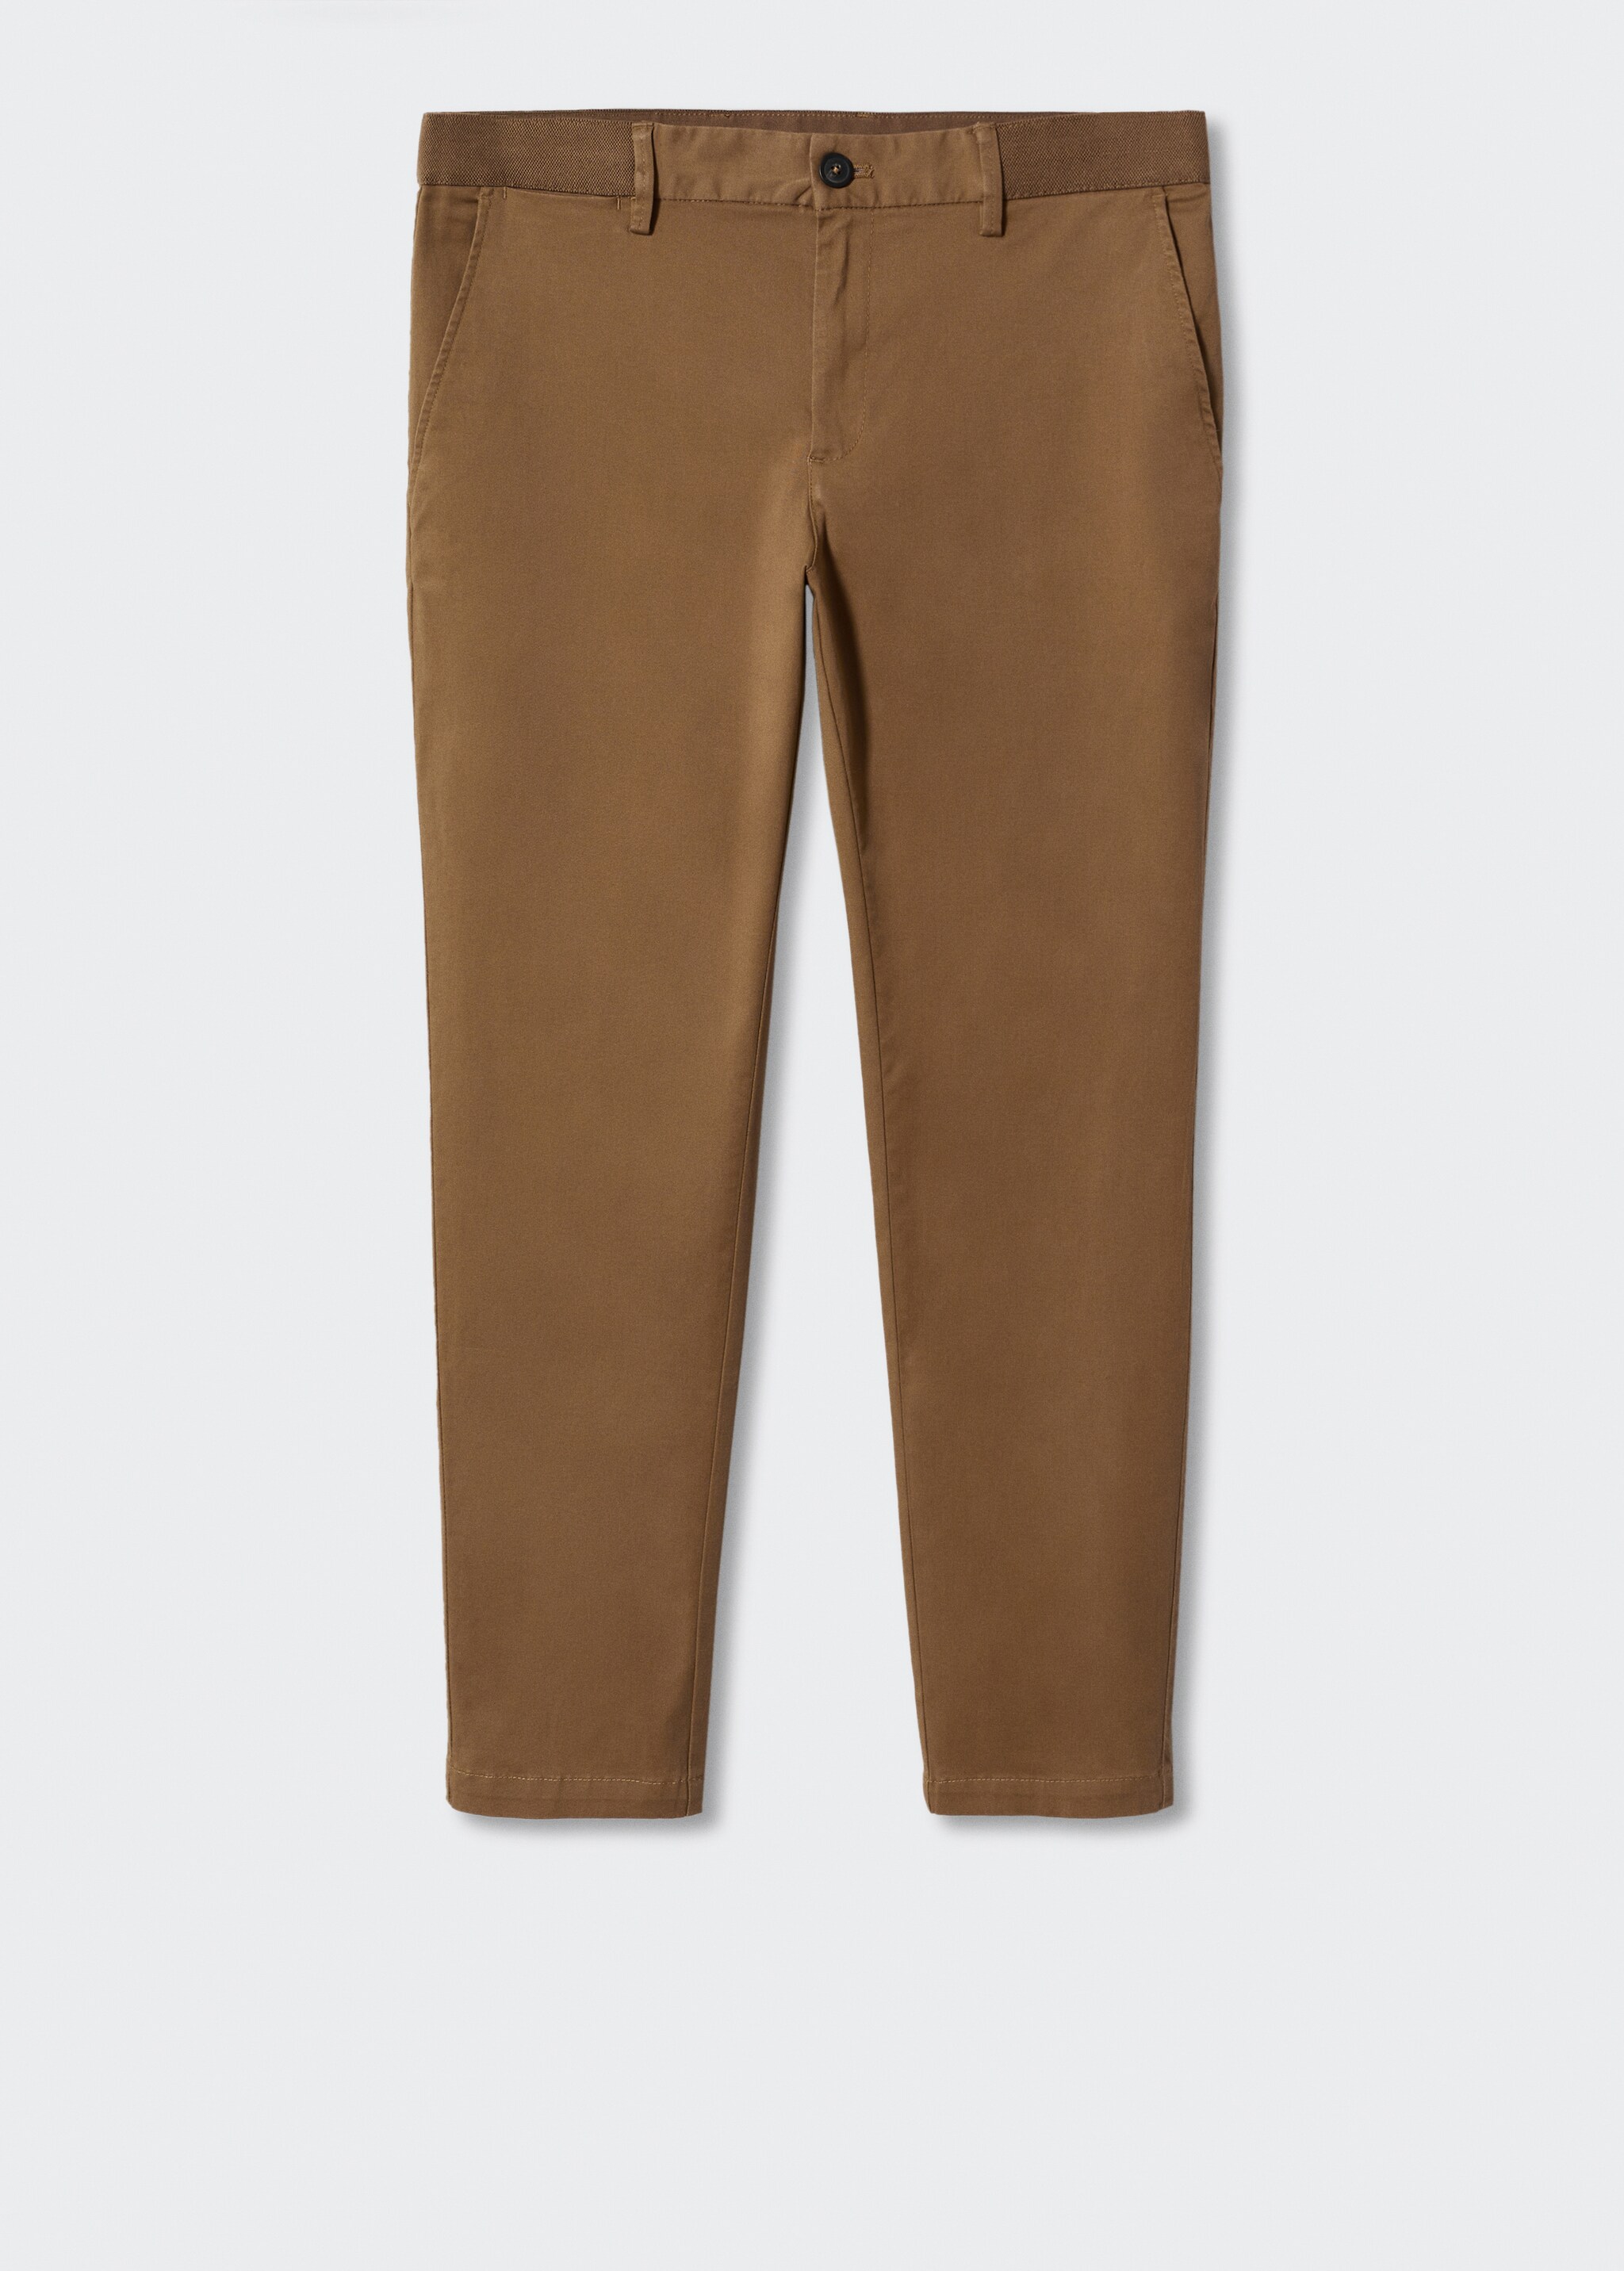 Cotton tapered crop pants - Article without model